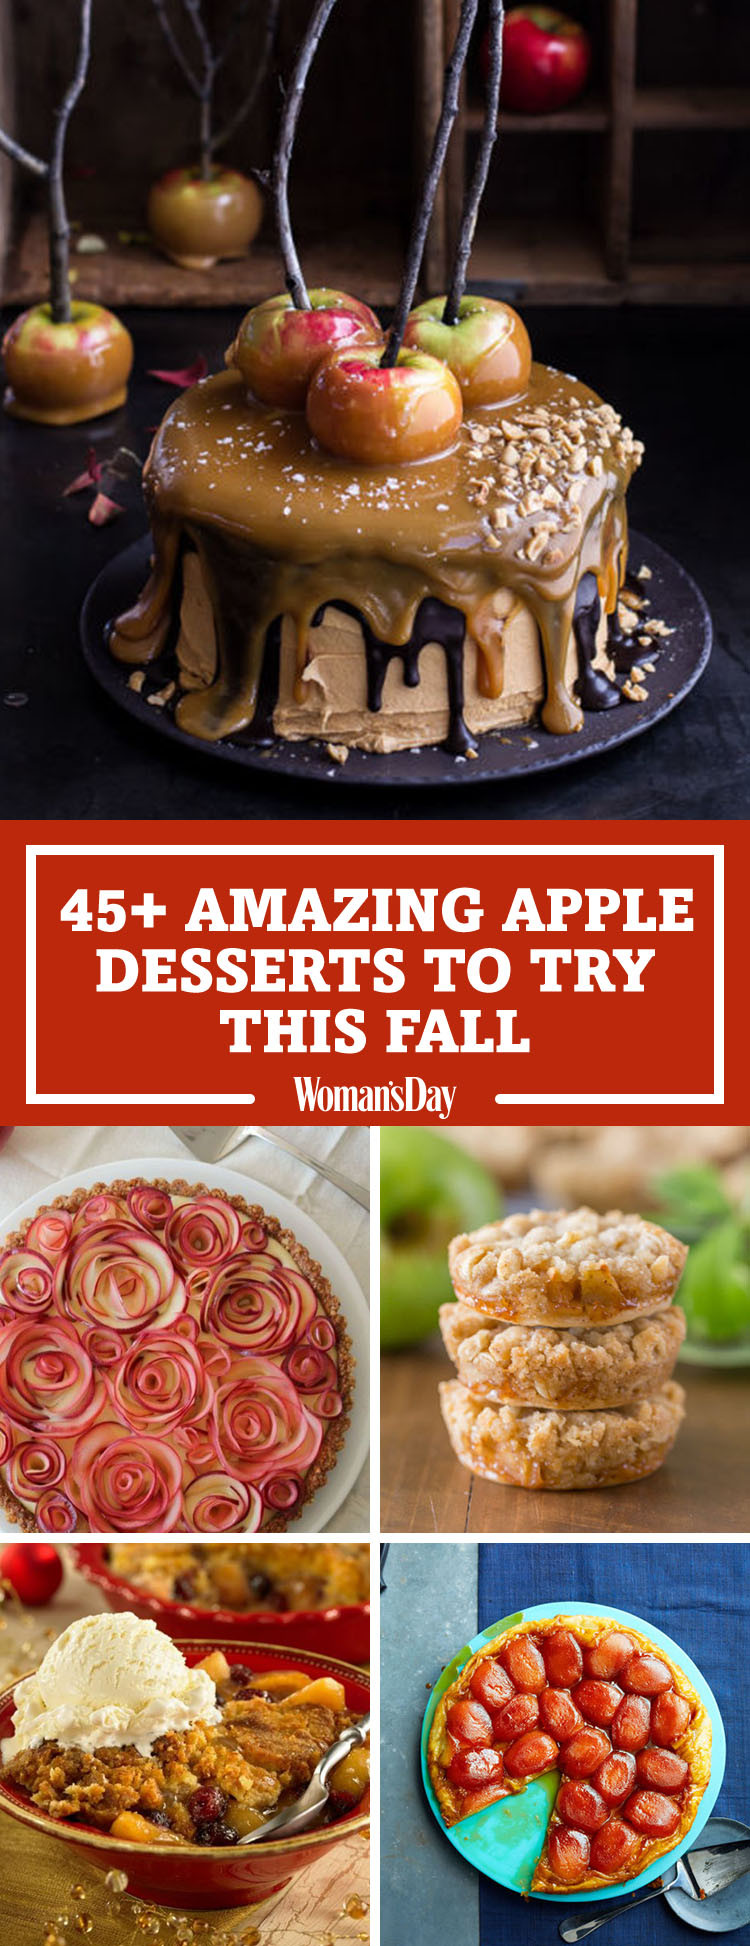 Fall Apple Recipes
 50 Easy Apple Desserts for Fall Best Recipes for Apple